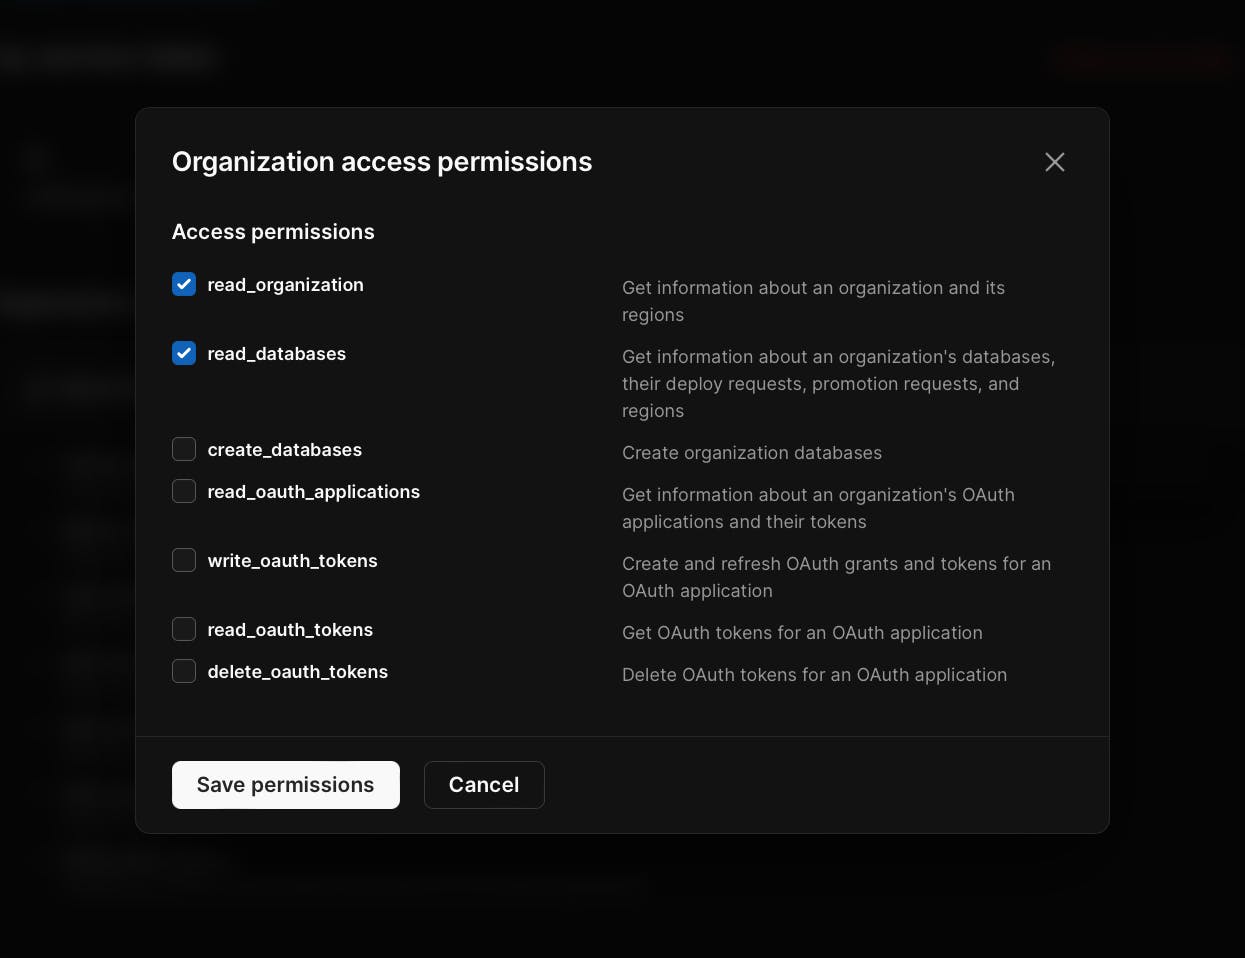 The Organization access permissions modal while modifying permissions.